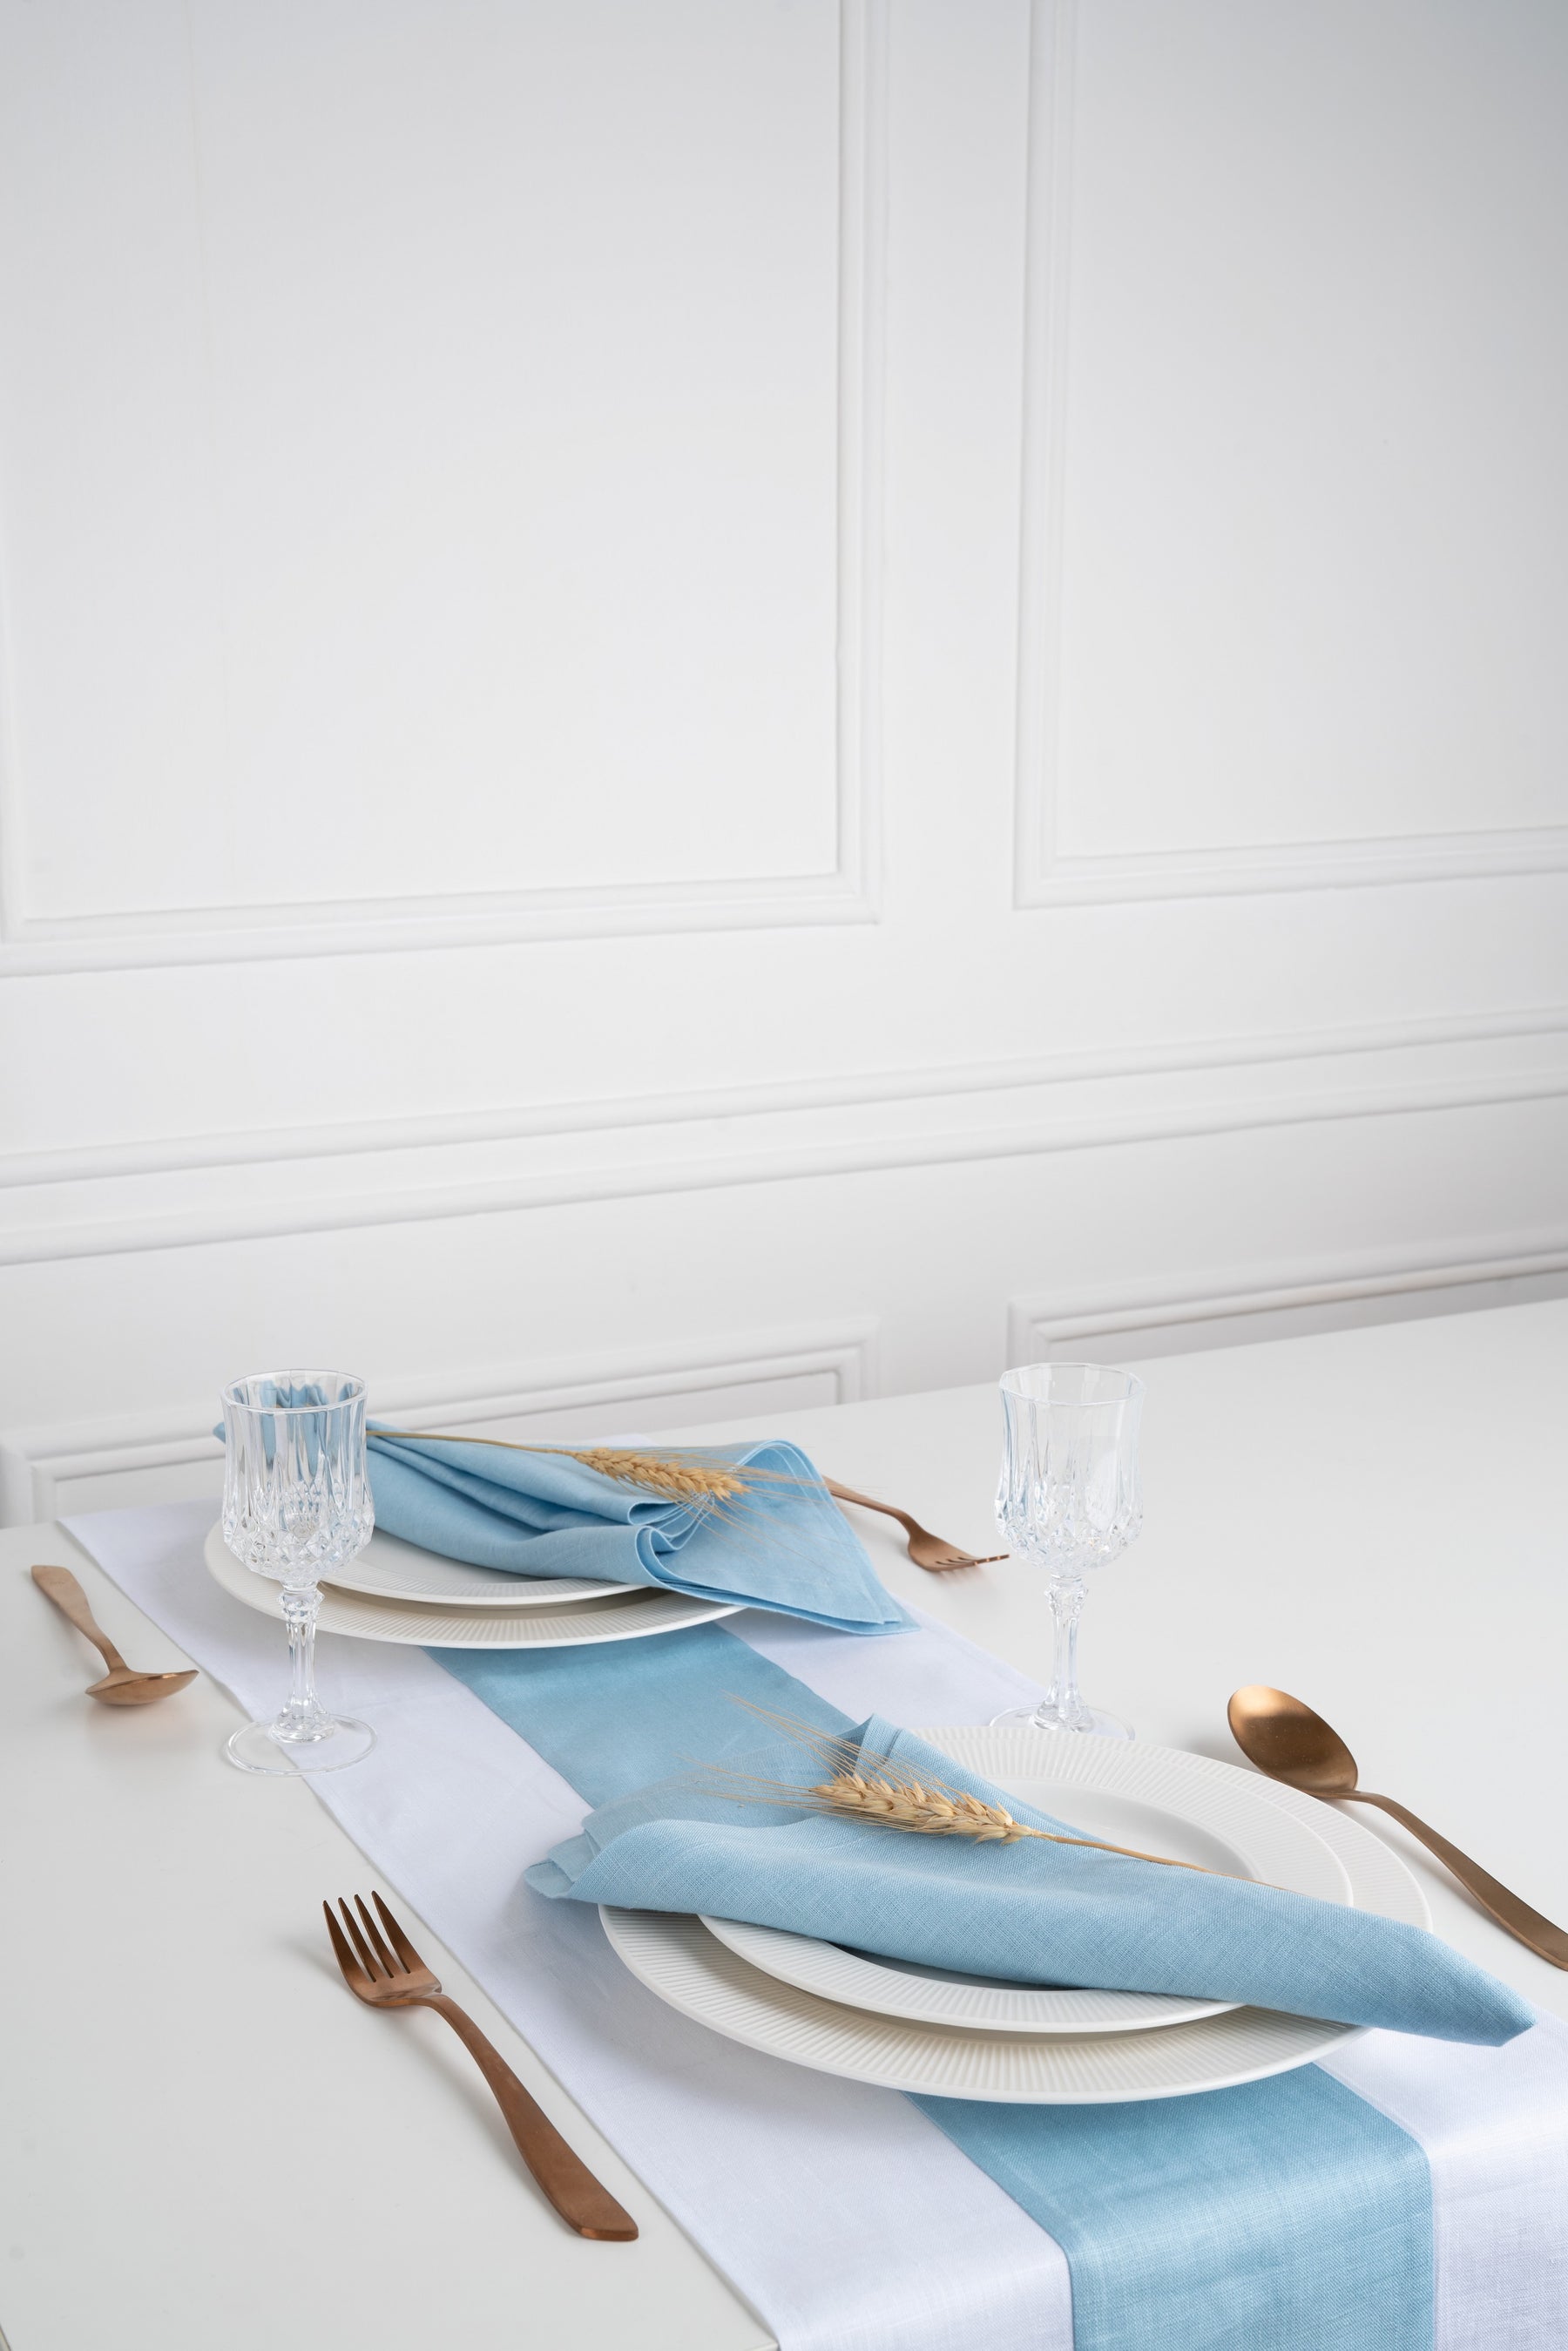 Splicing Linen Table Runner - White and Powder blue